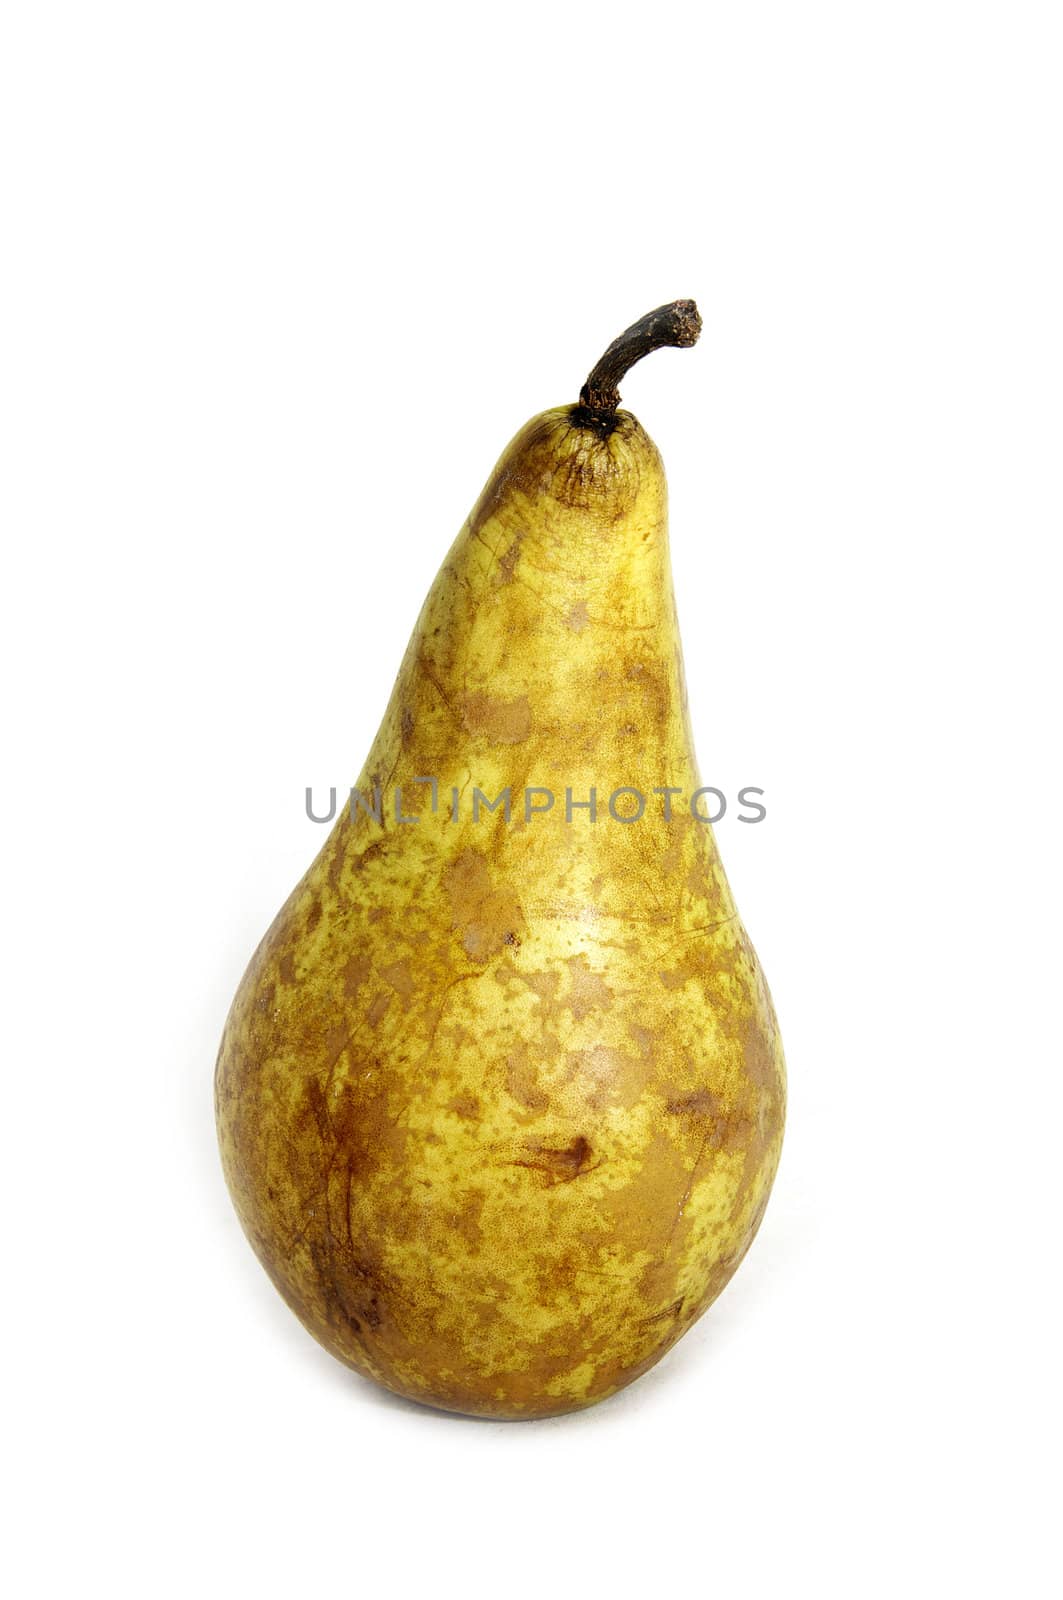 large pear by Lester120